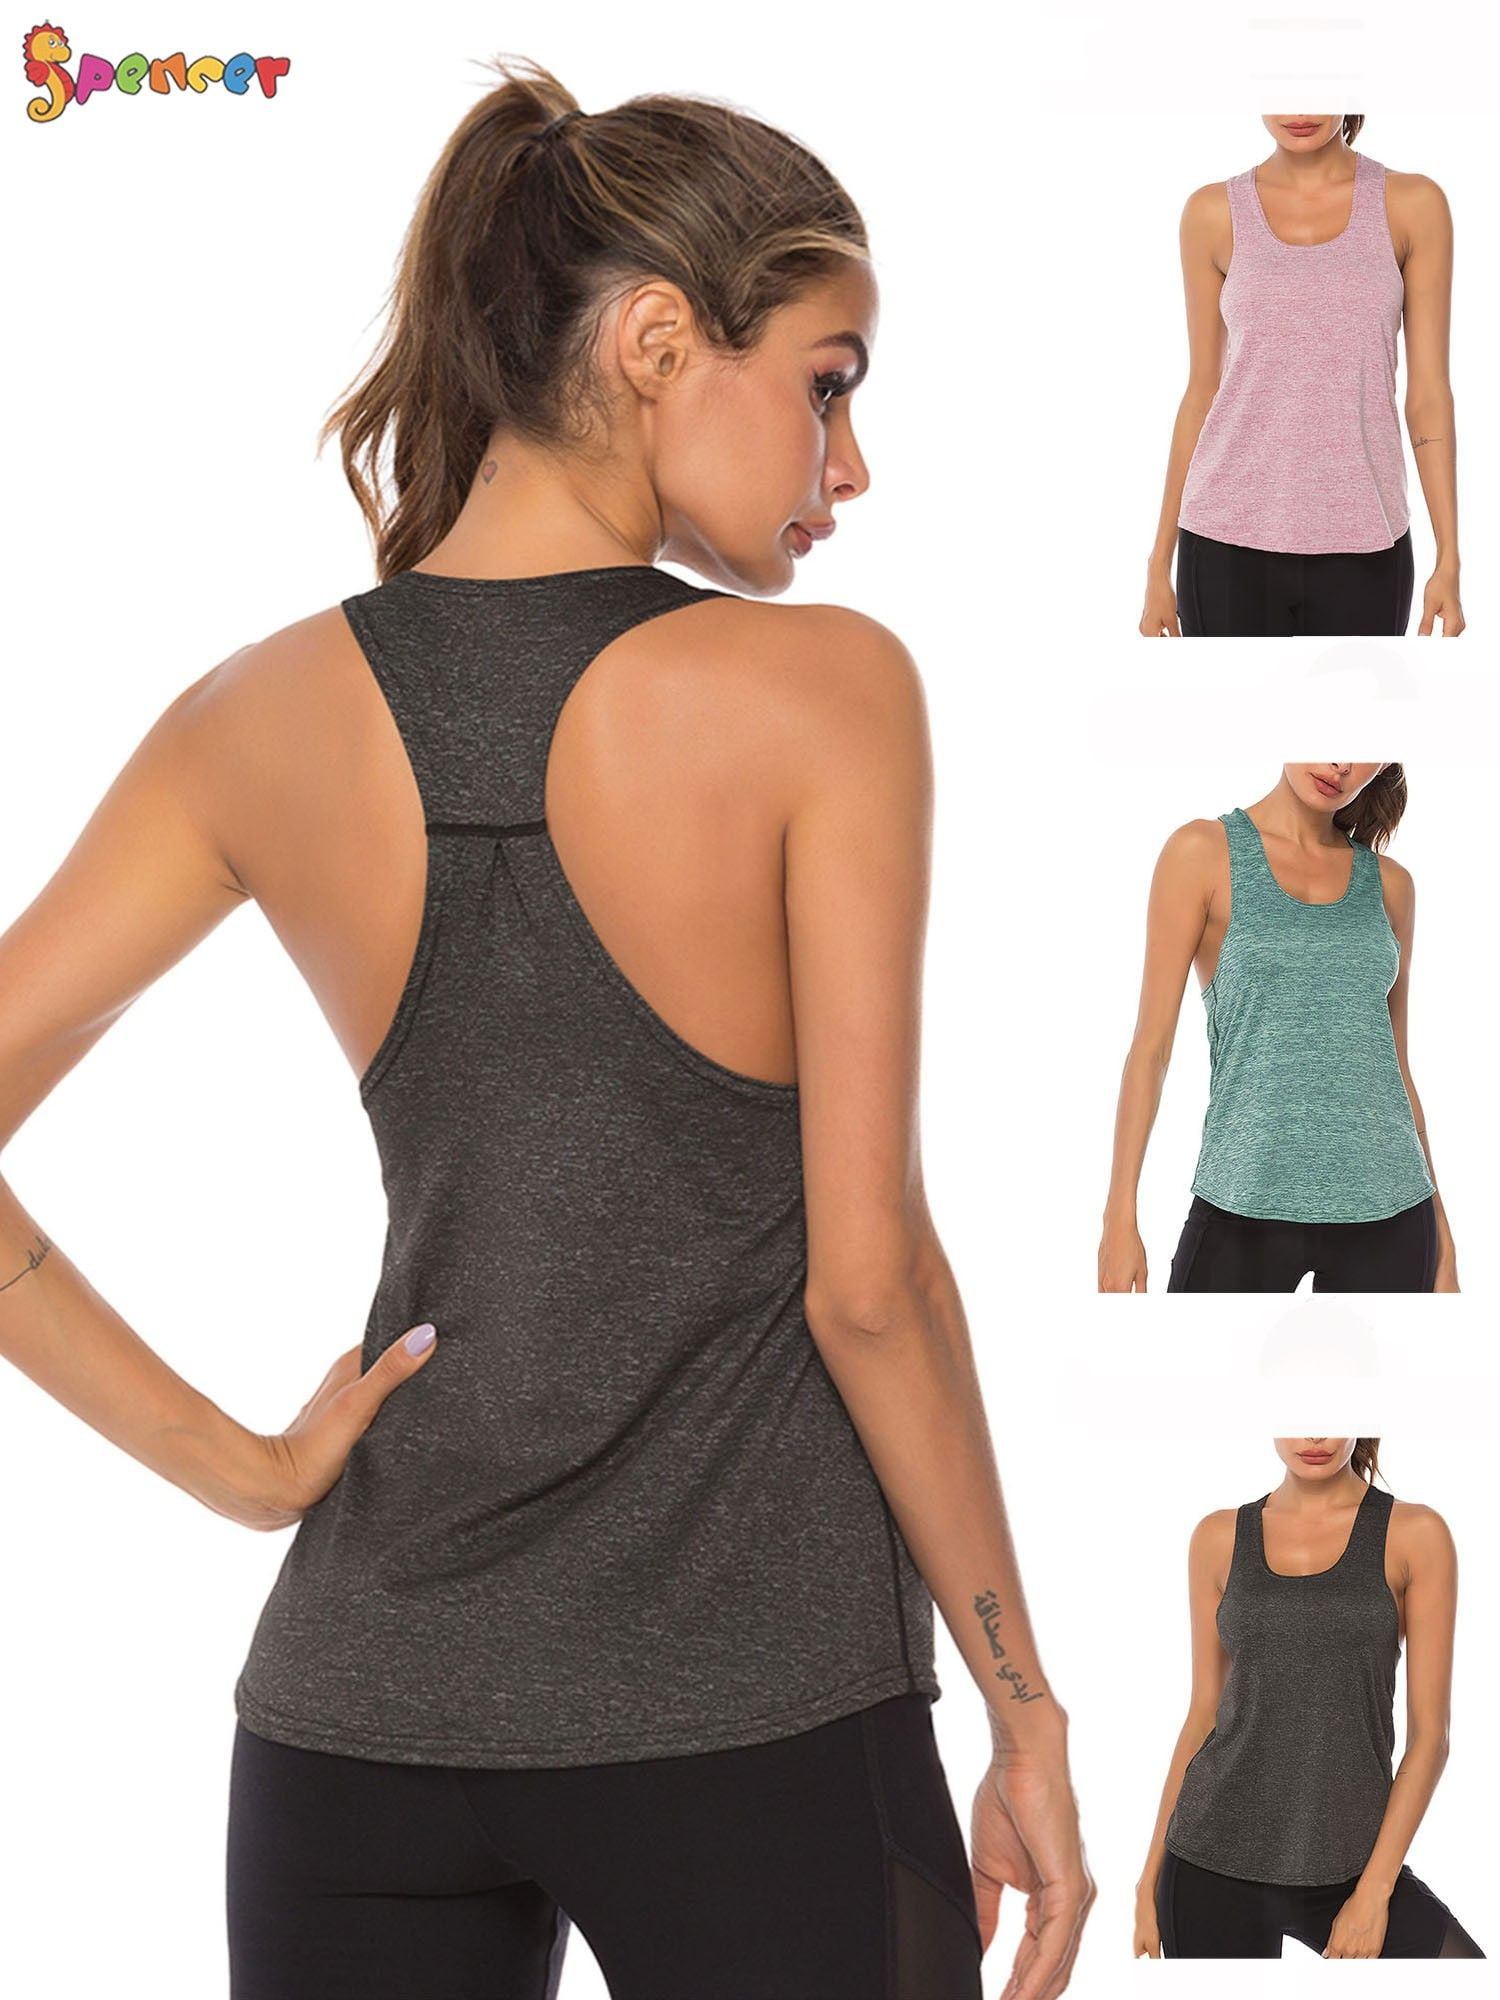 Spencer Women's Workout Tank Tops Casual Sleeveless Racerback Athletic Yoga  Tops Quick Dry Sport Shirts for Gym Exercise (M, Grey)